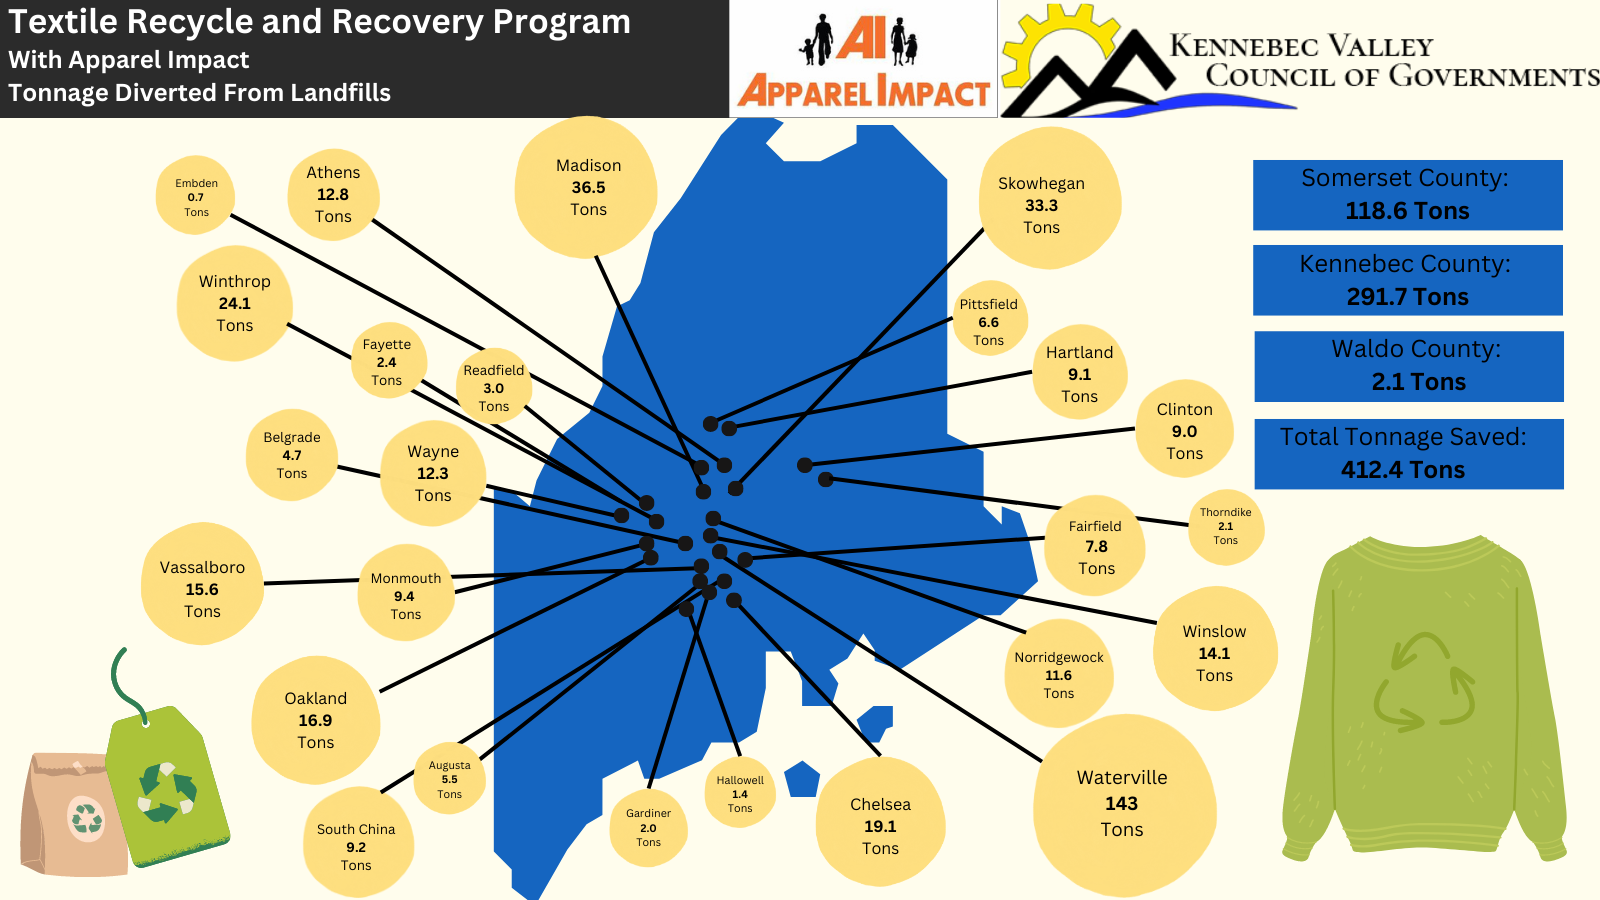 Textile Recovery Graphic